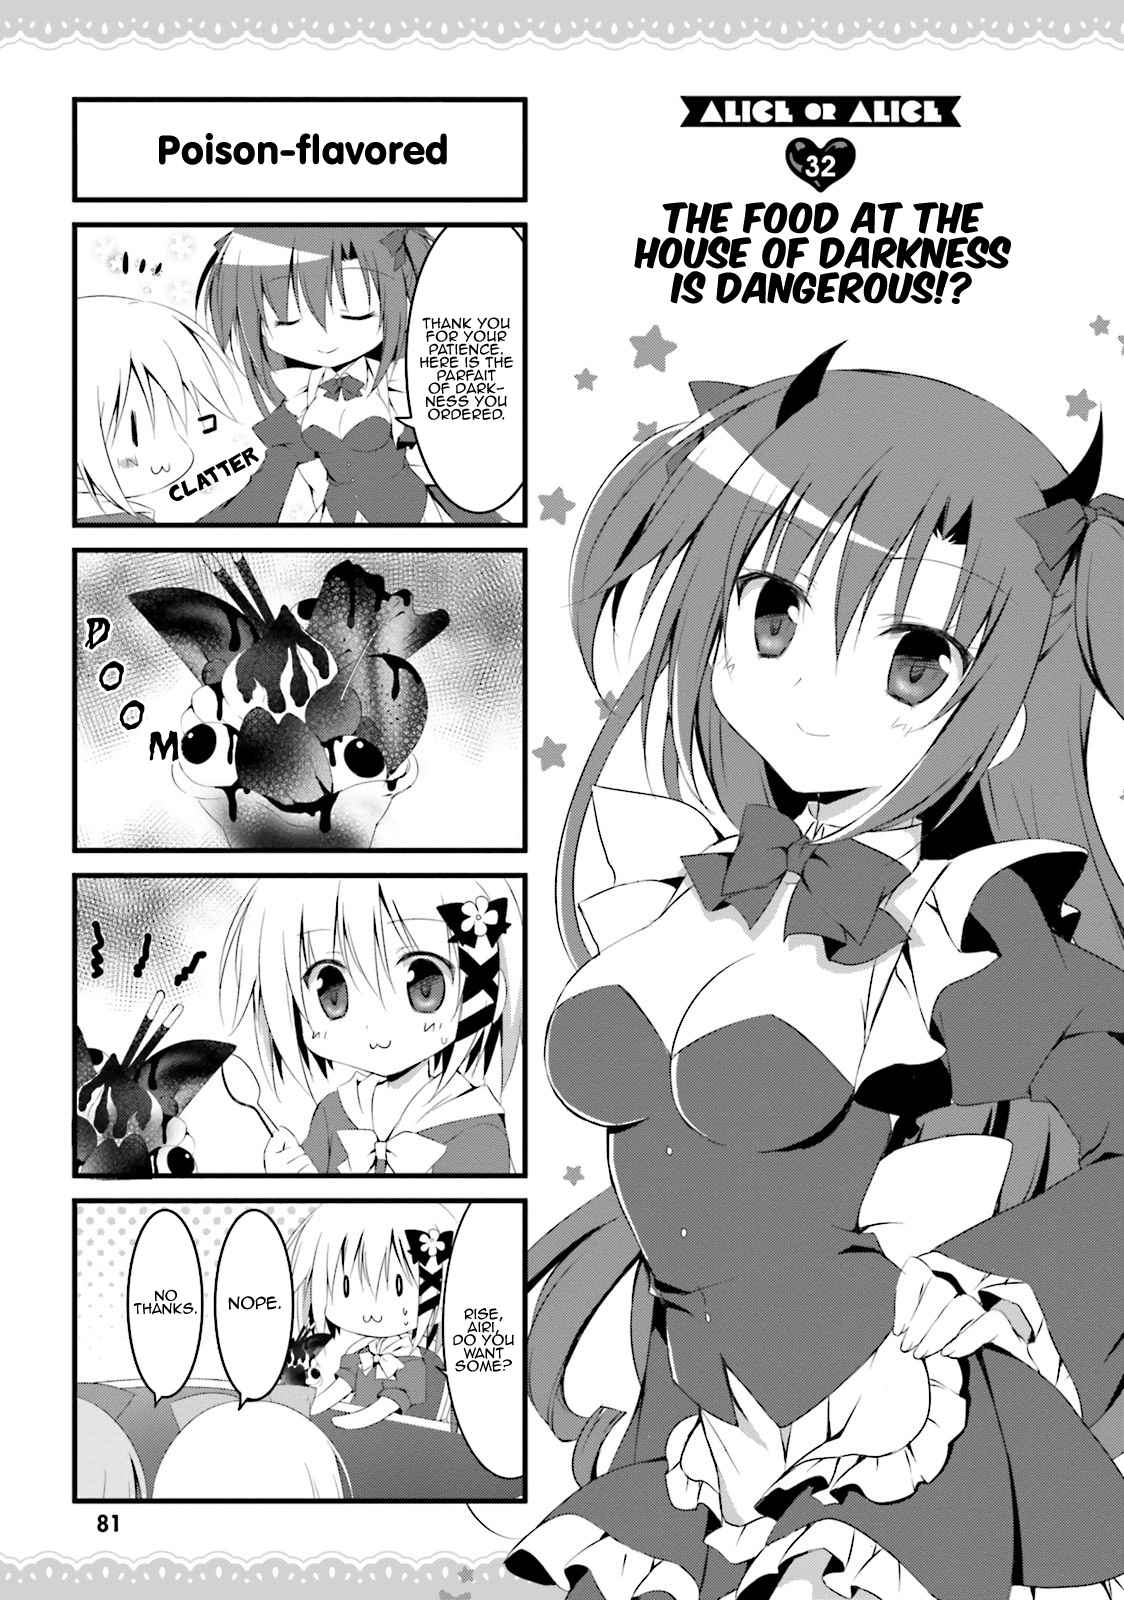 Alice or Alice Vol. 3 Ch. 32 The food at the House of Darkness is dangerous!?